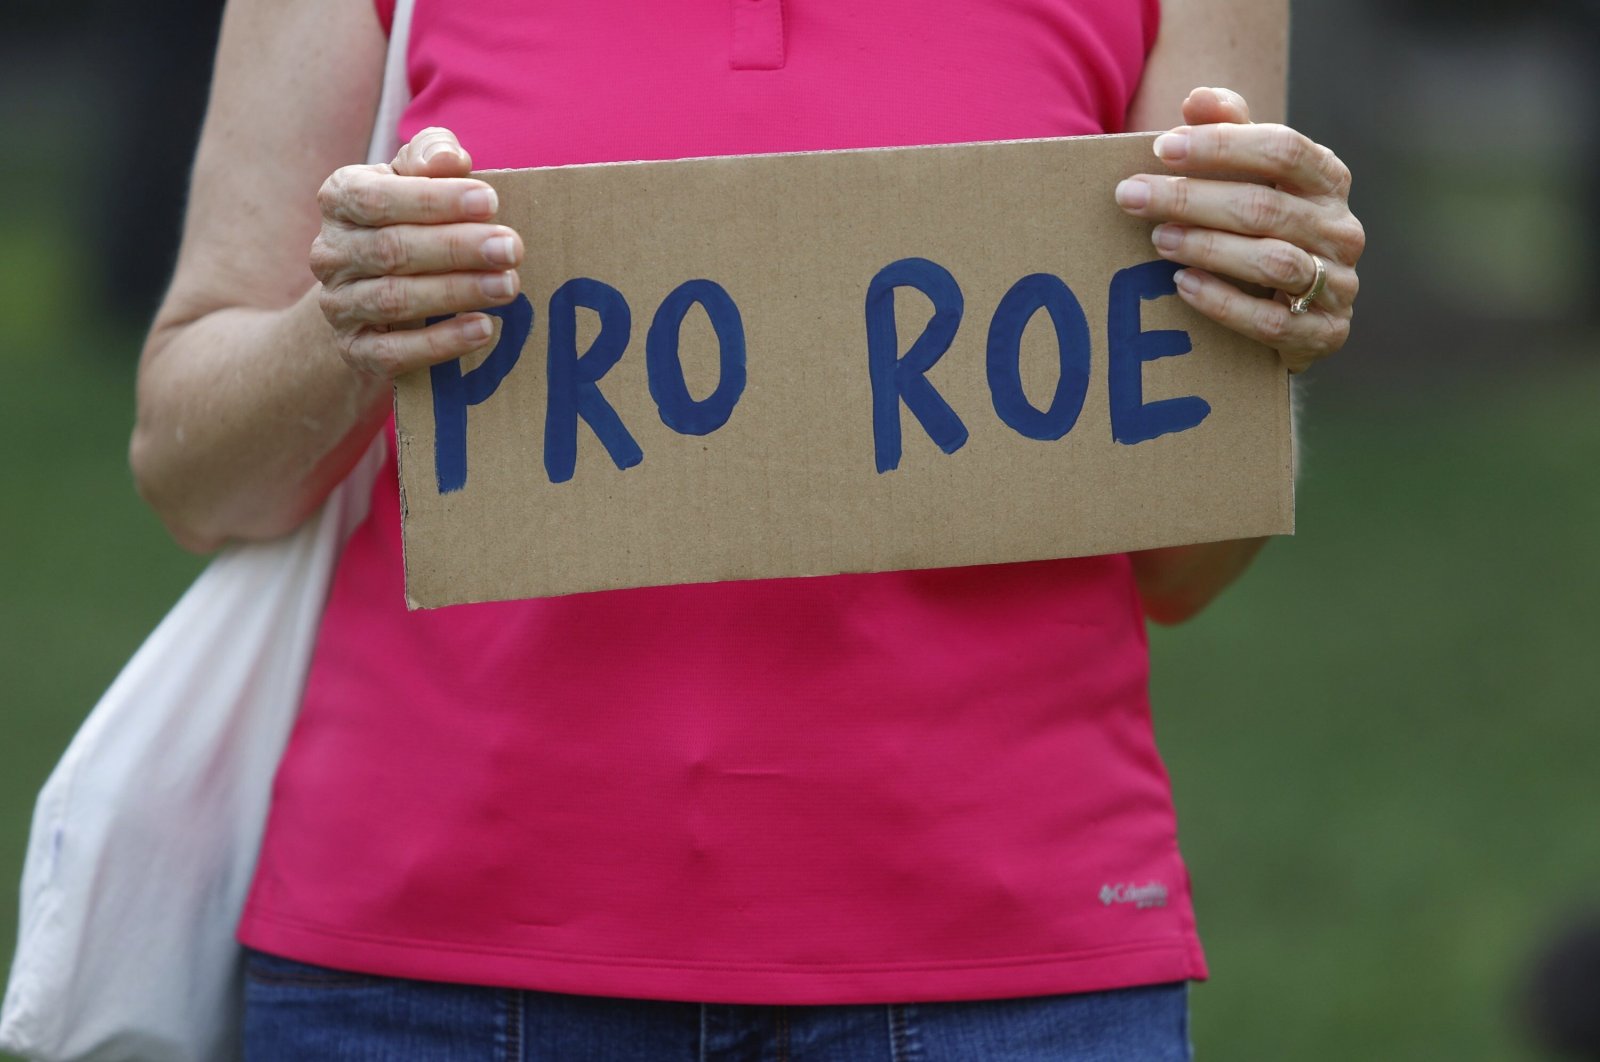 Protesters display their pro-abortion signs on June 24, 2022, at North Straub Park in St. Petersburg, Florida, U.S. (AP Photo)